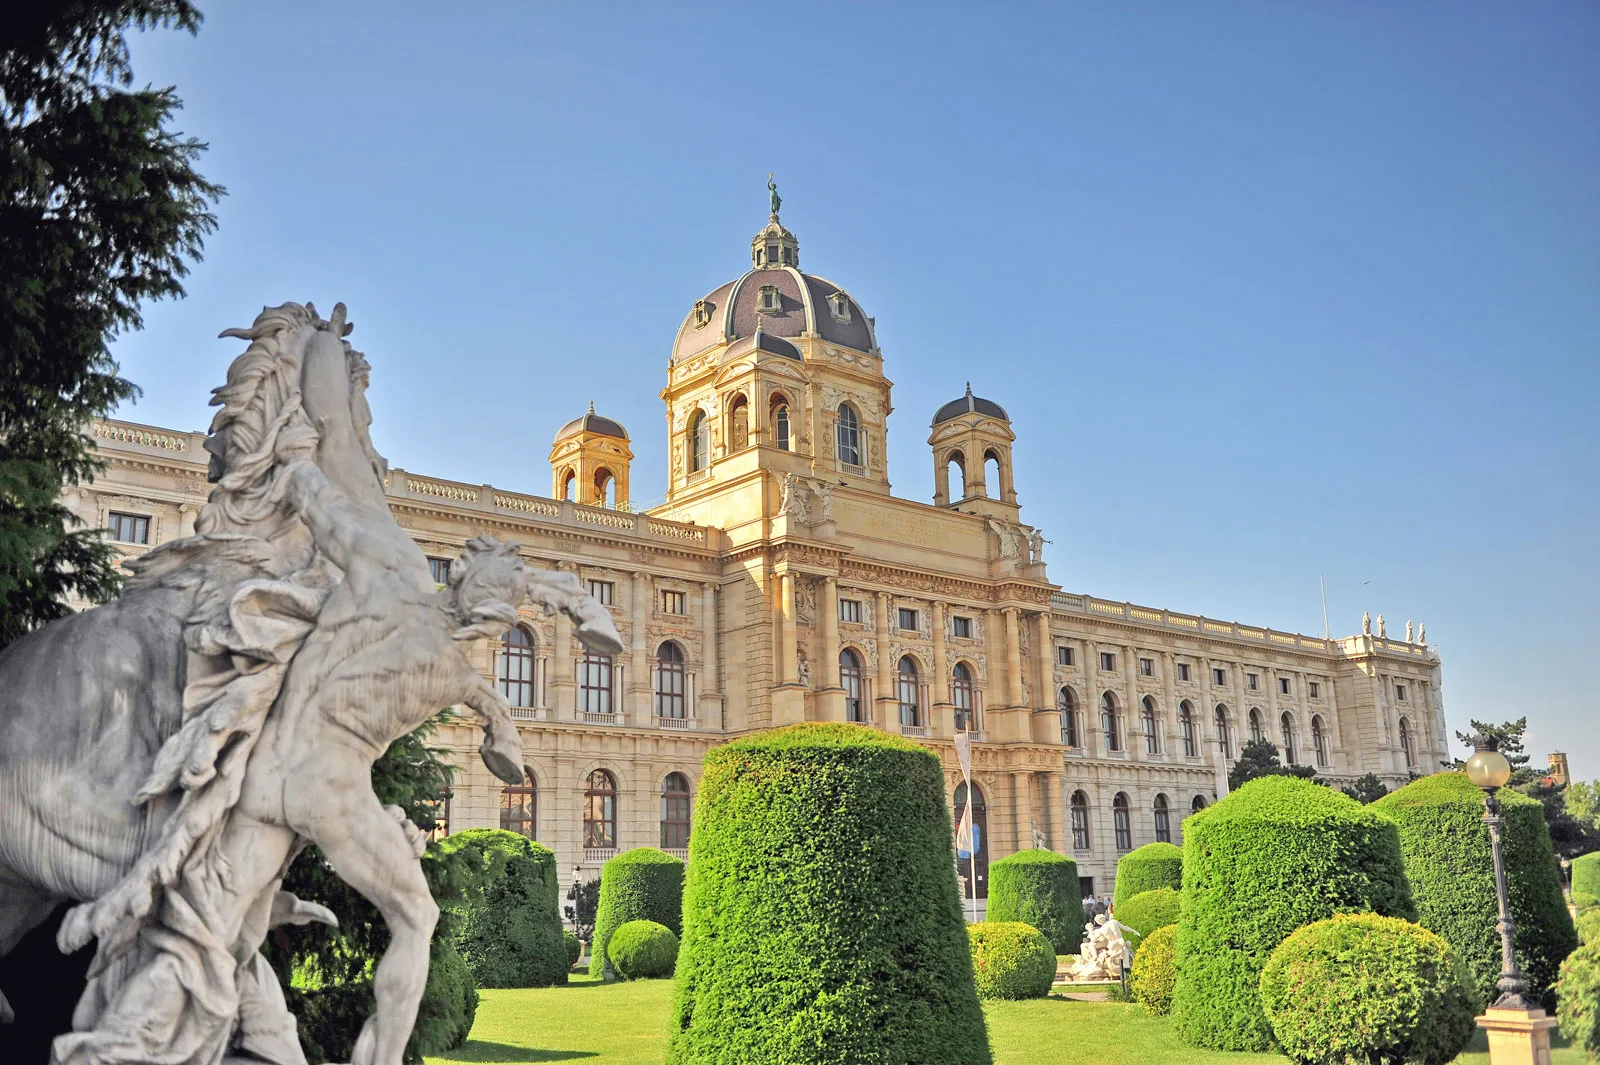 Learn the rich history at the Vienna Museum